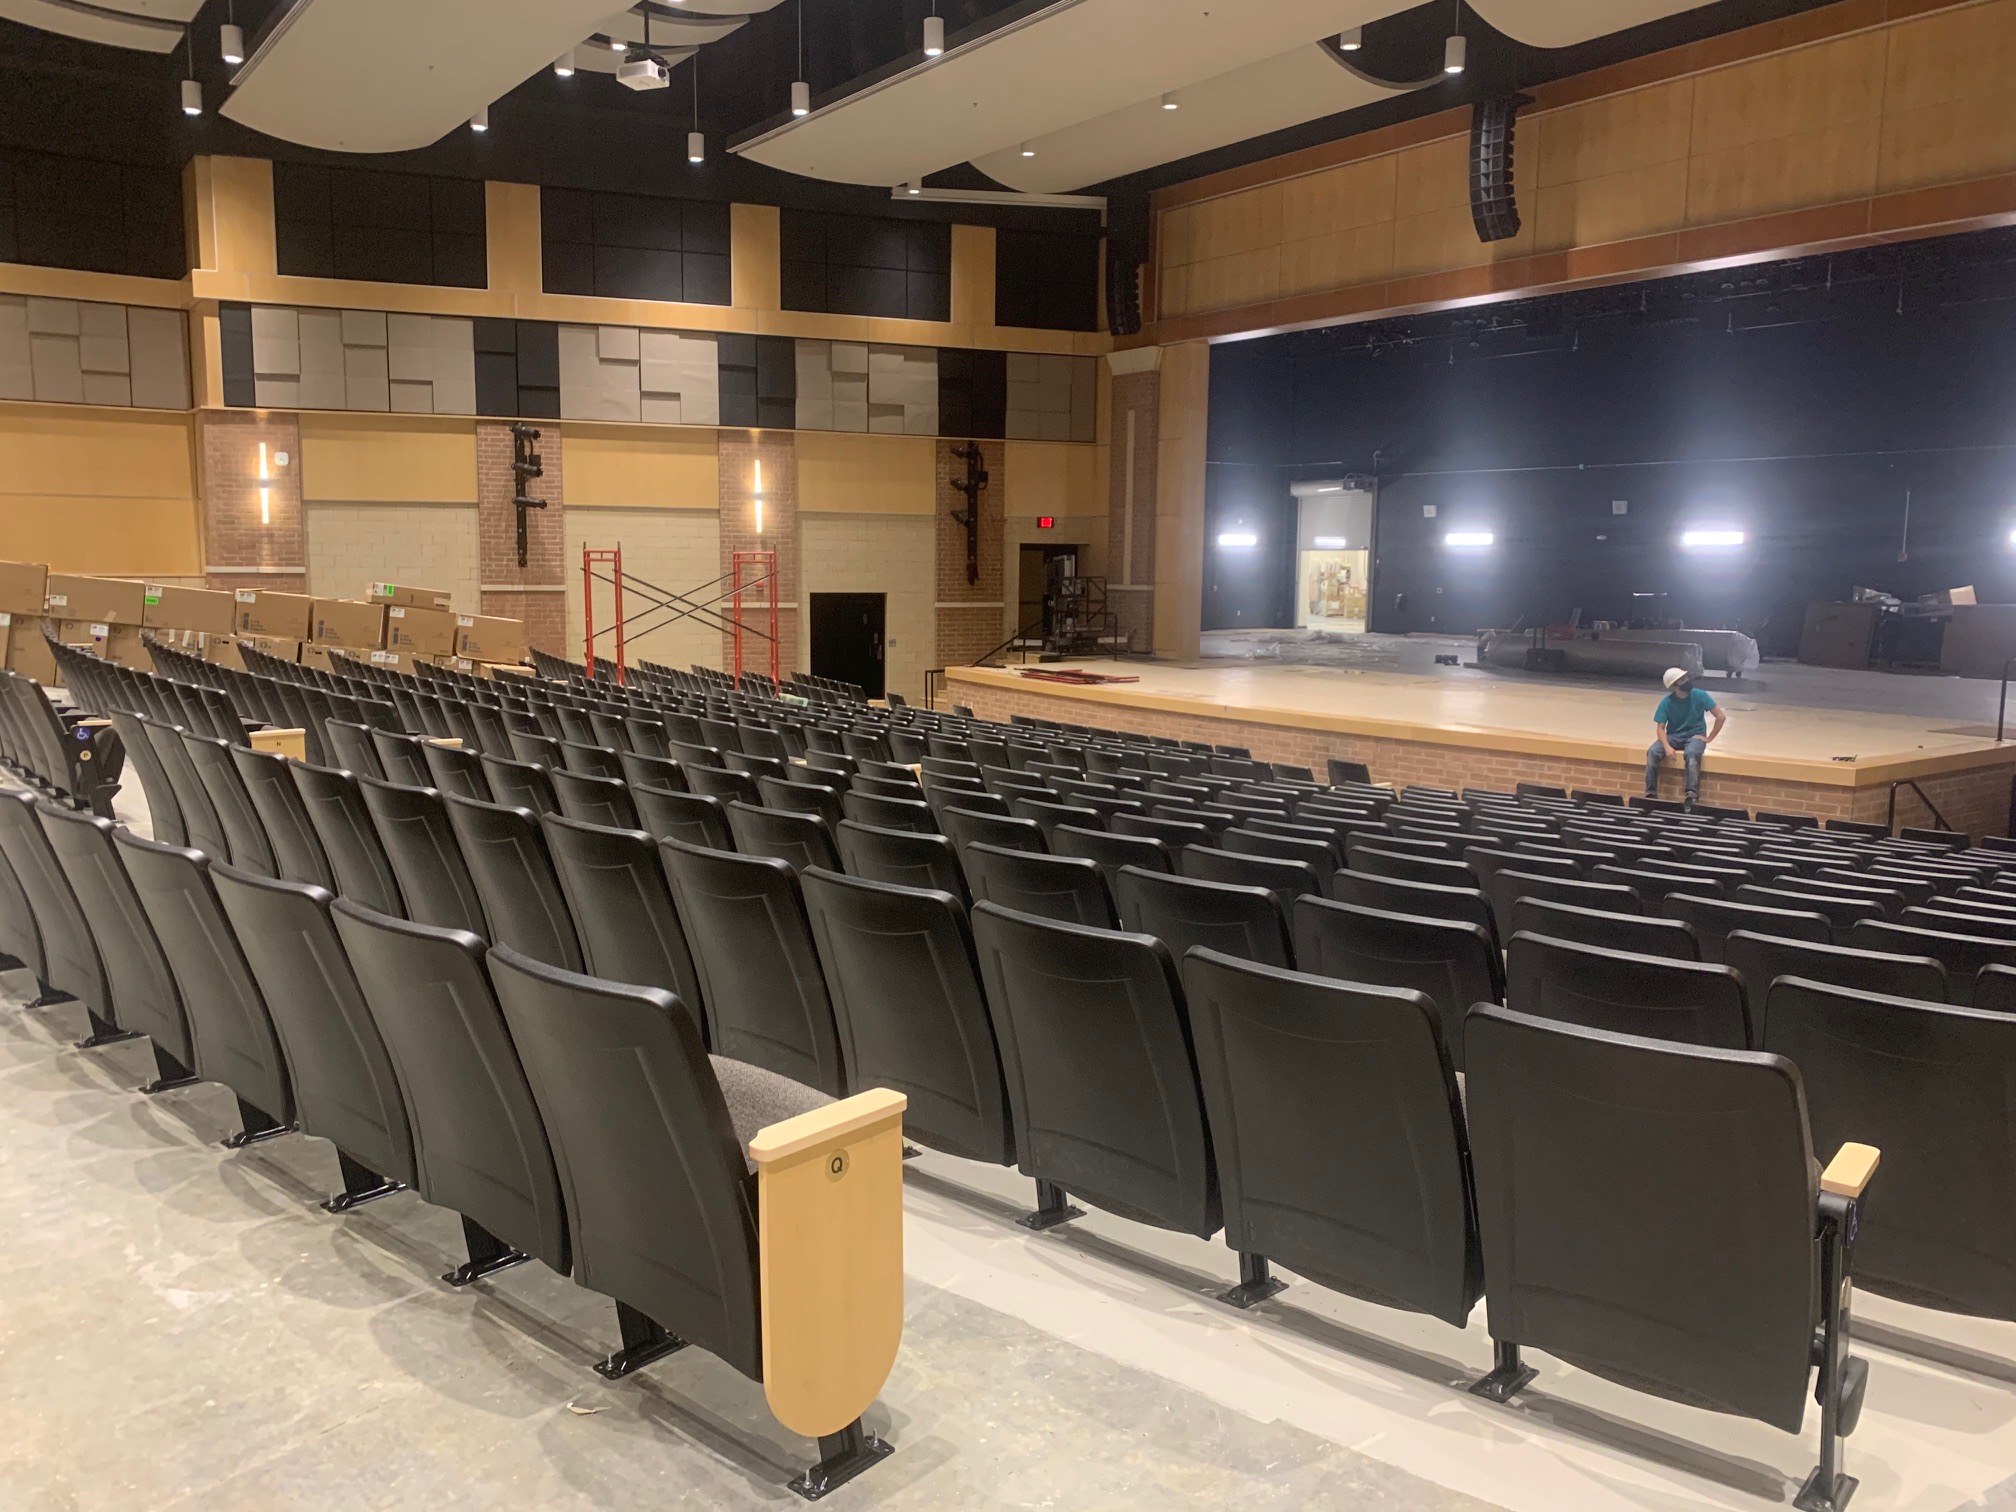 here-s-a-look-inside-the-new-seneca-valley-high-school